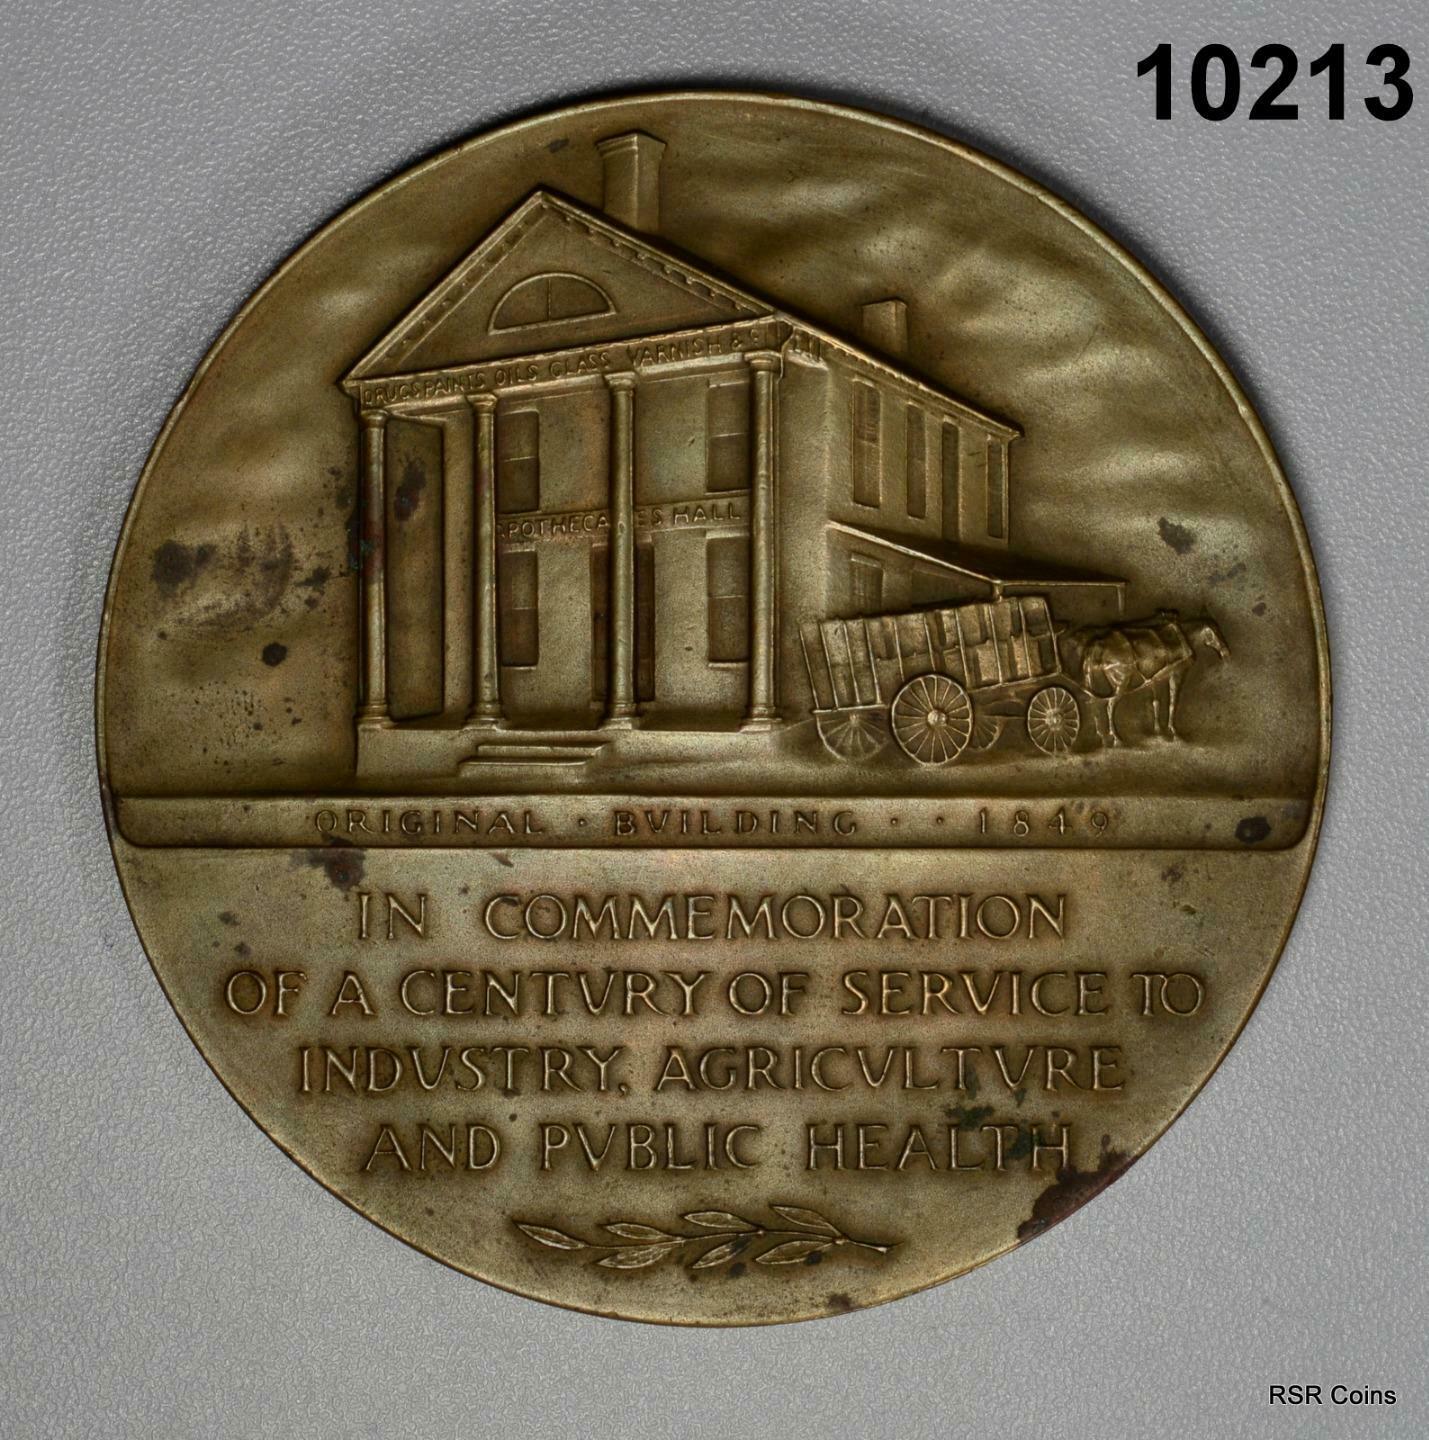 VINTAGE 1949 BRONZE MEDAL FOR APOTHECARIES HALL CO. MEDALLIC ART 3 INCH #10213